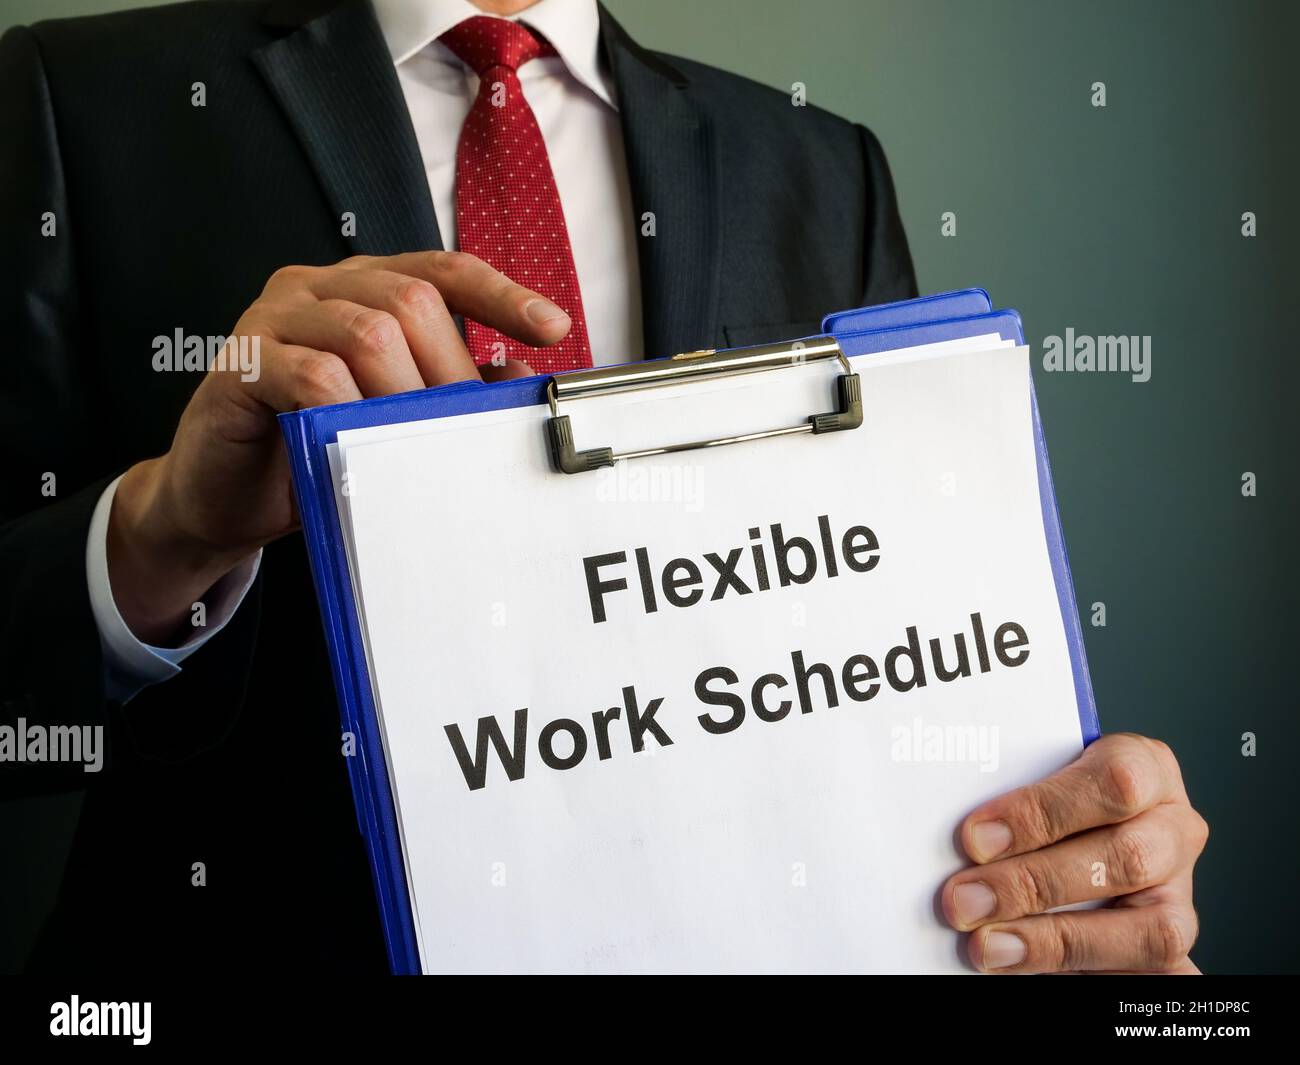 A manager shows Flexible Work Schedule in clipboard. Stock Photo